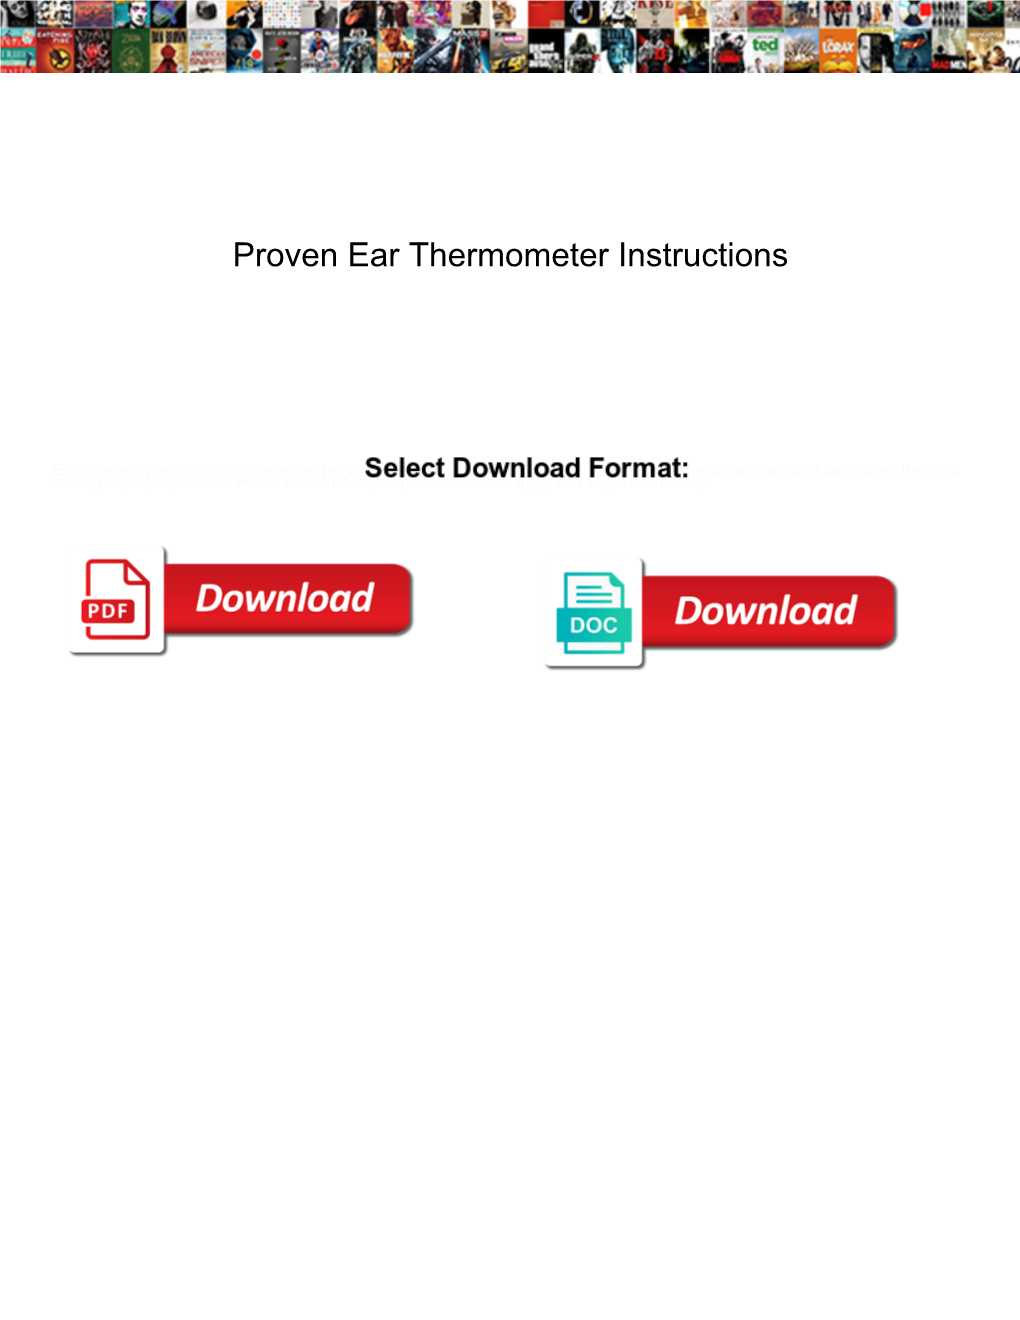 Proven Ear Thermometer Instructions